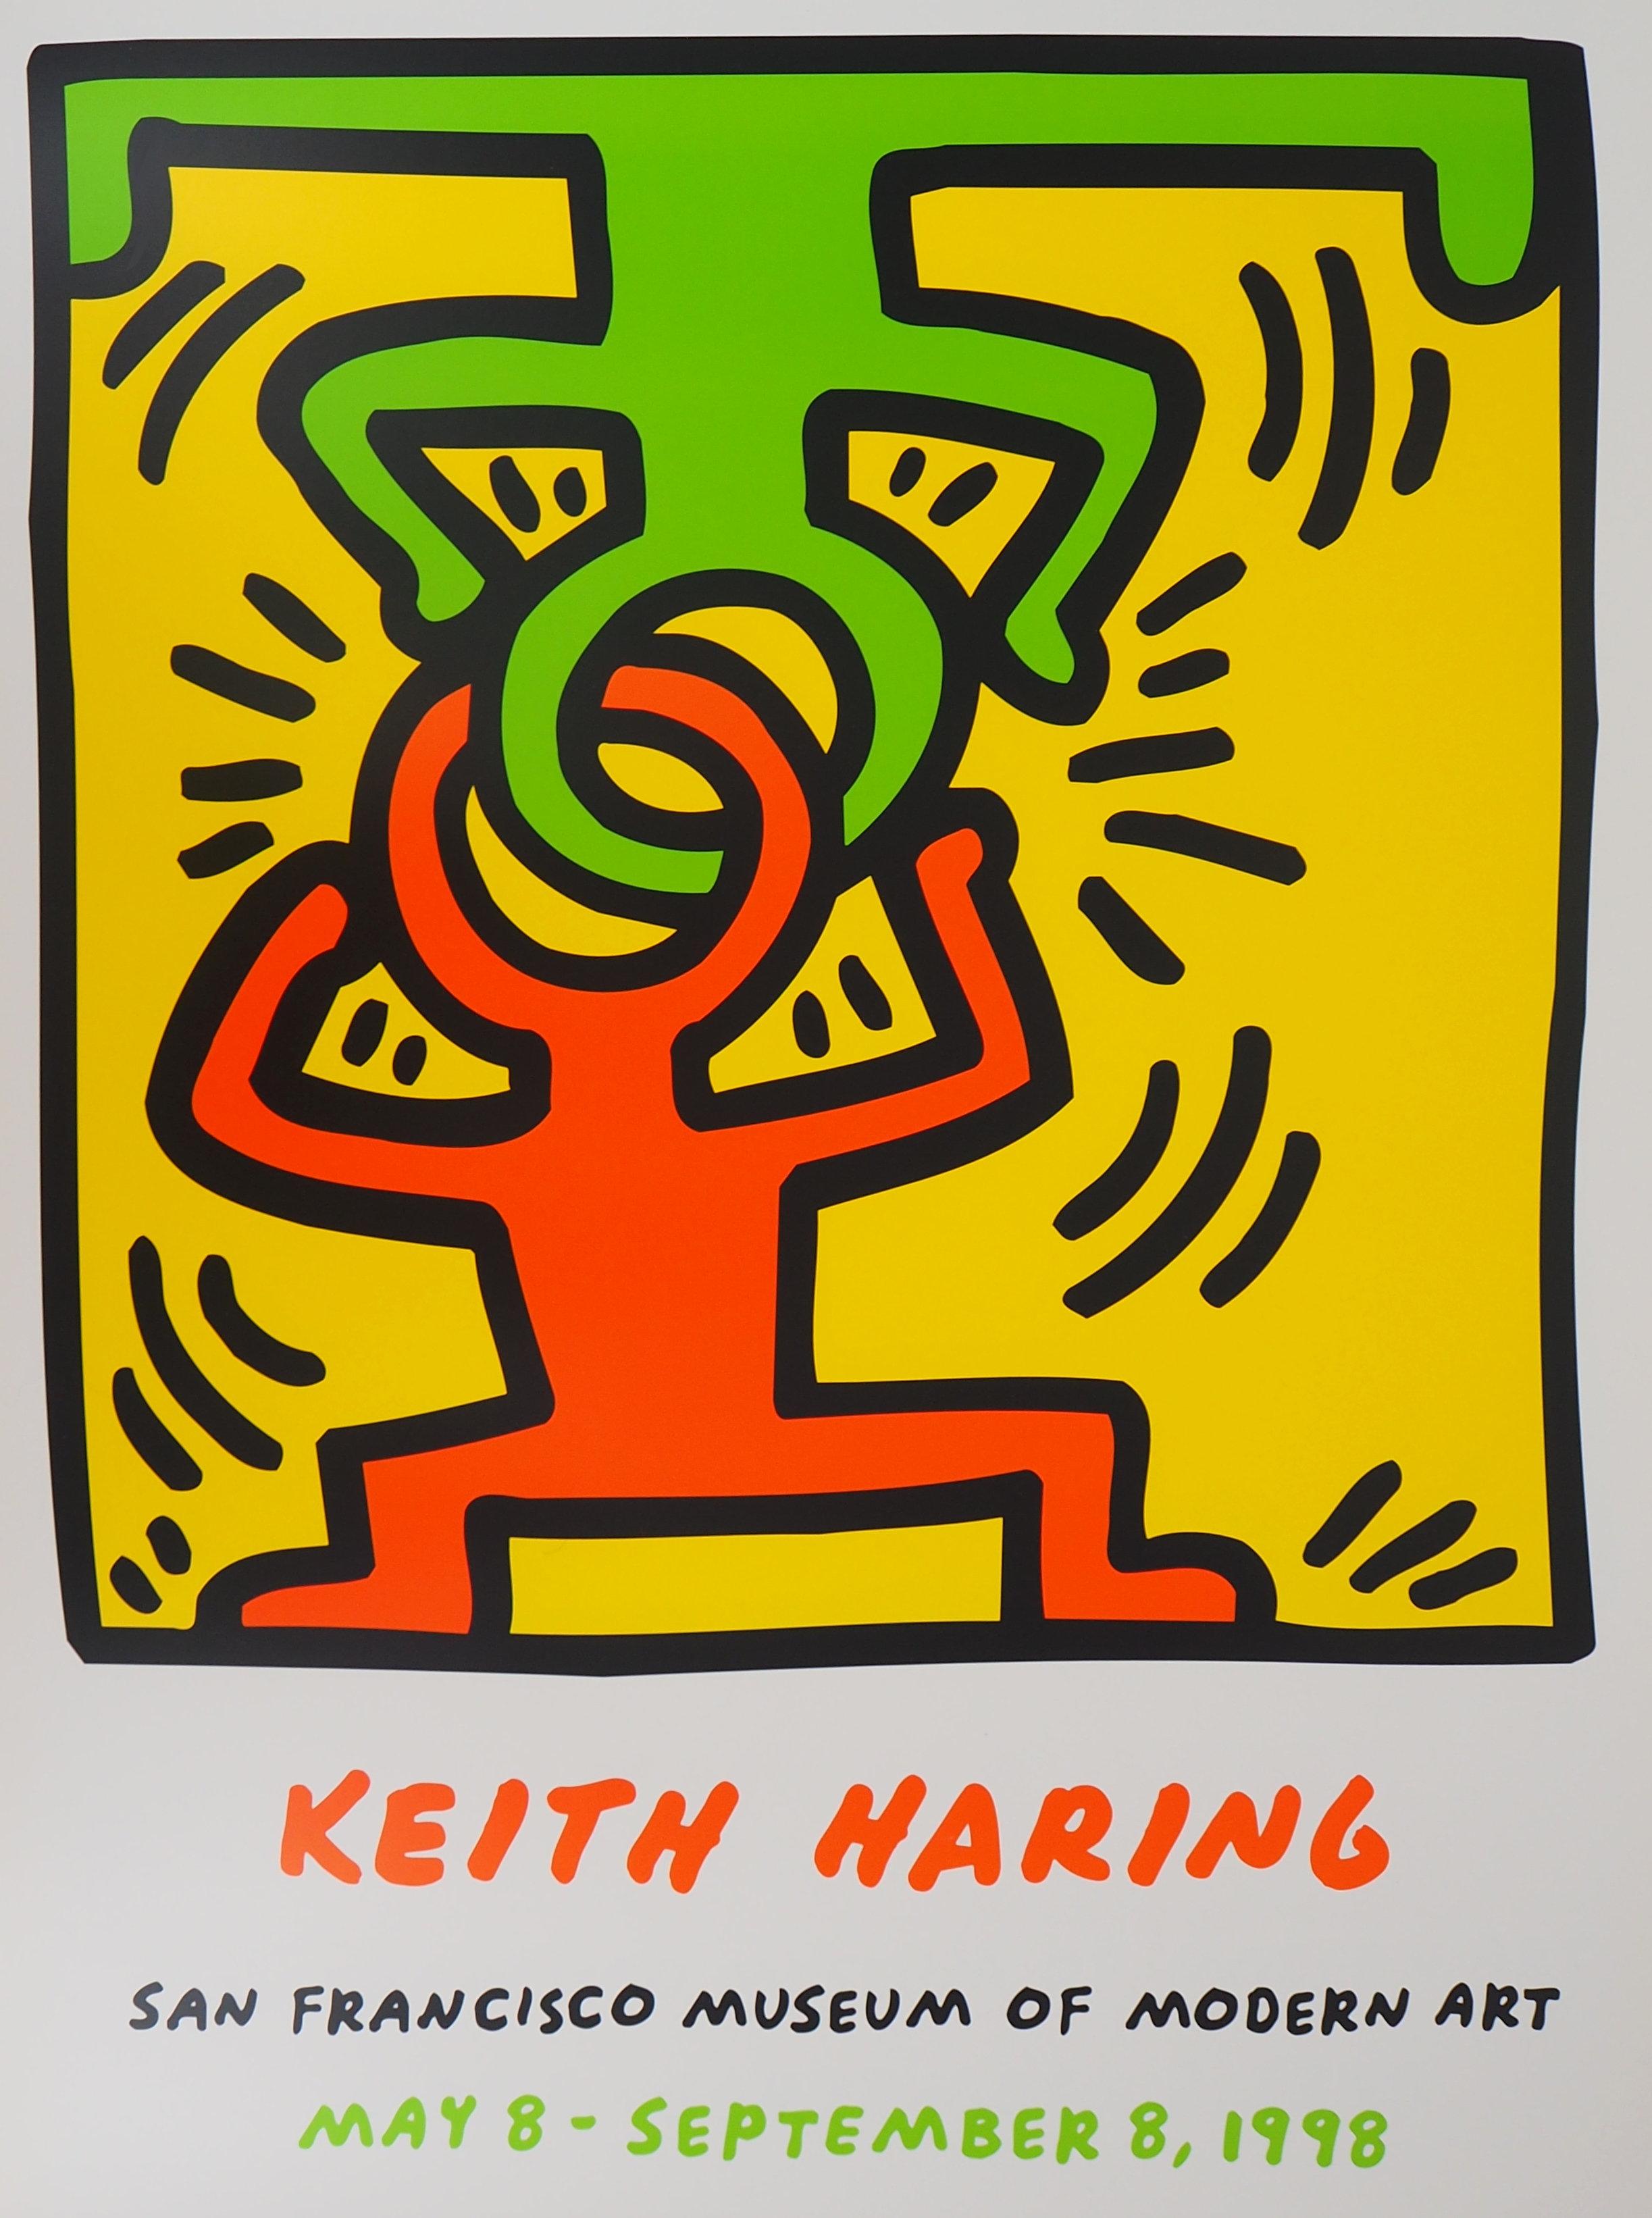 Headstand (San Francisco Museum of Modern Art) - Exhibition Poster - Print by (after) Keith Haring